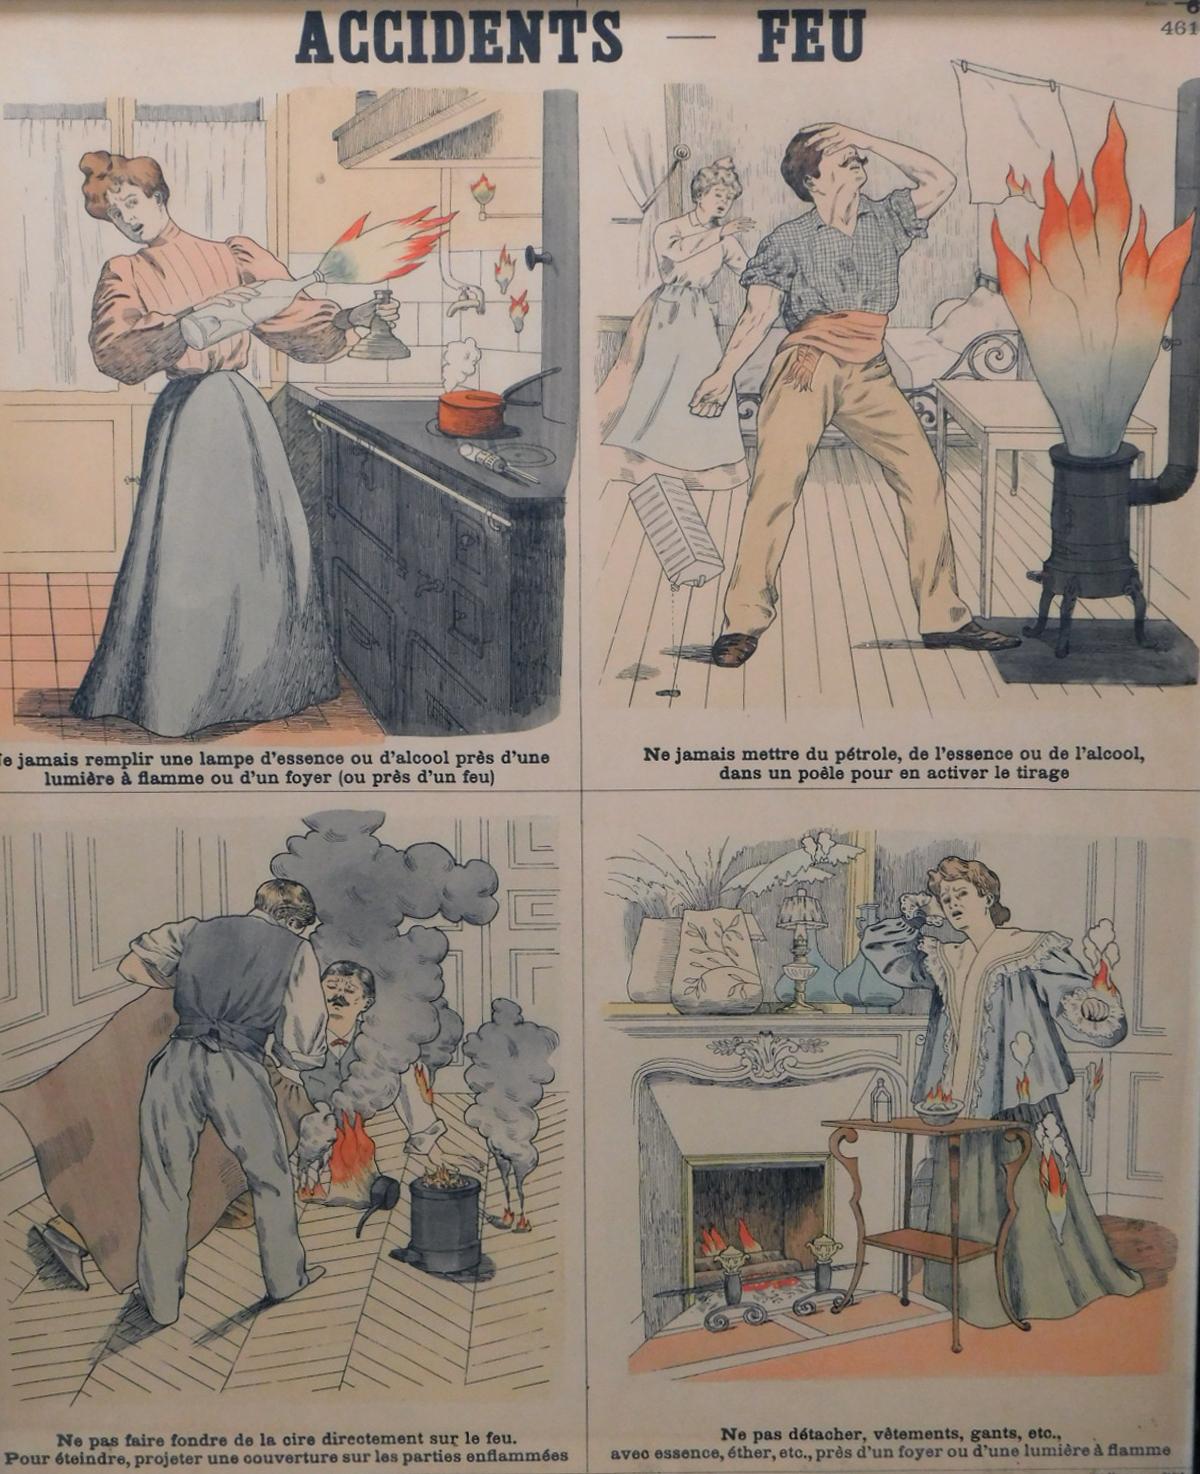 Each with four panels detailing various ways to prevent accidents and lessons learned, including 'Feu, Eau, Contagion, Empoisonnements, and Maison'; based on 19th century original lithographs by Emile Deyrolle; Les Fils d’Emile Deyrolle, Rue du Bac,